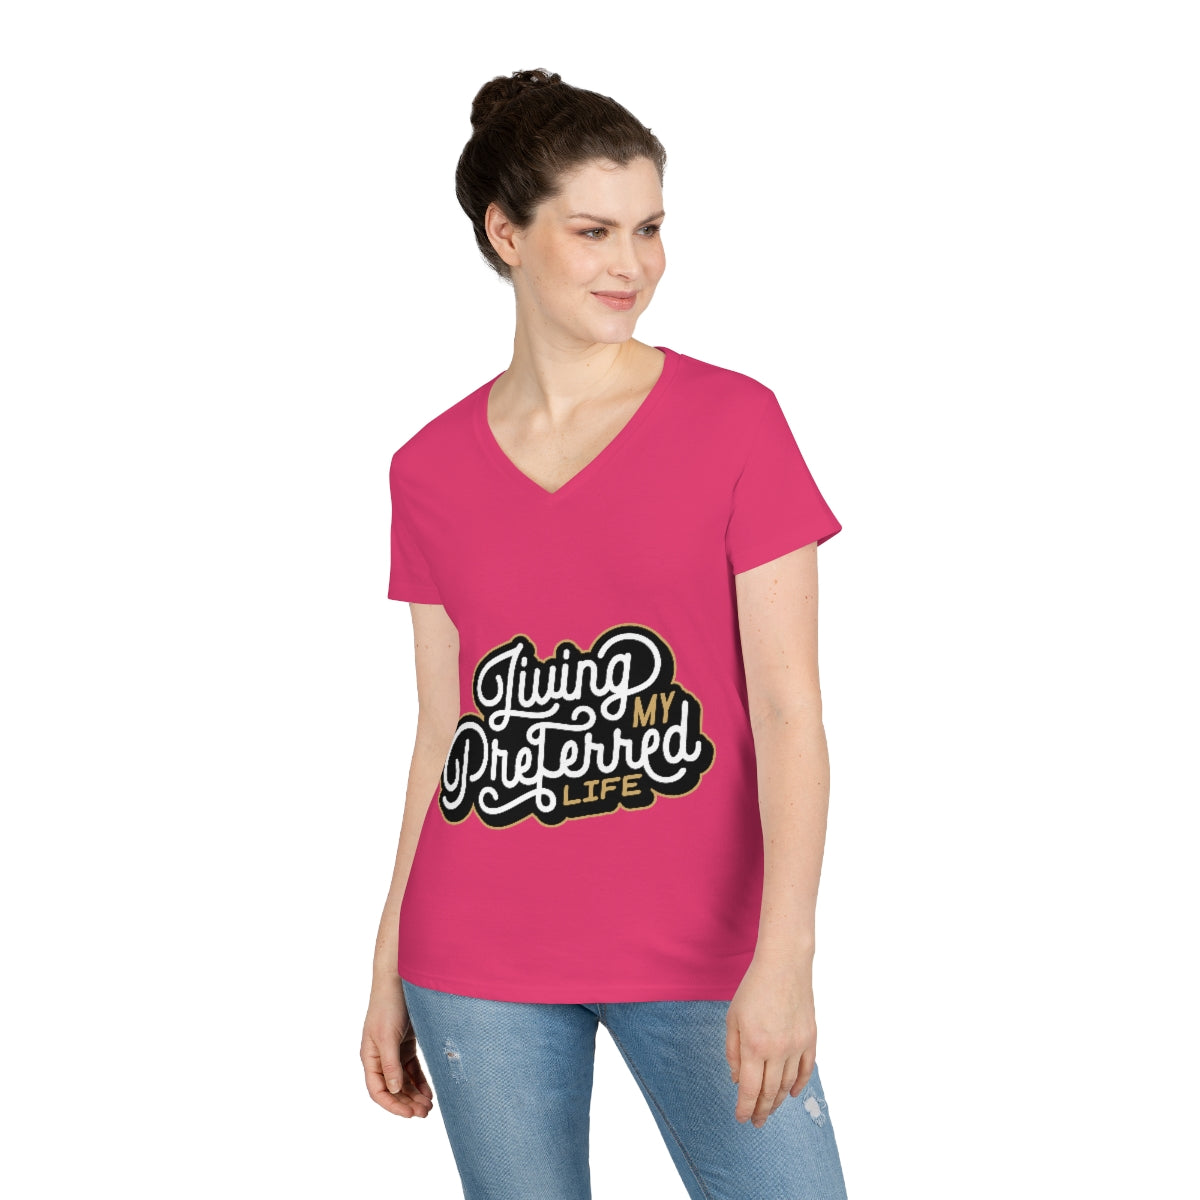 Client's Living My Preferred Life - Ladies' V-Neck T-Shirt